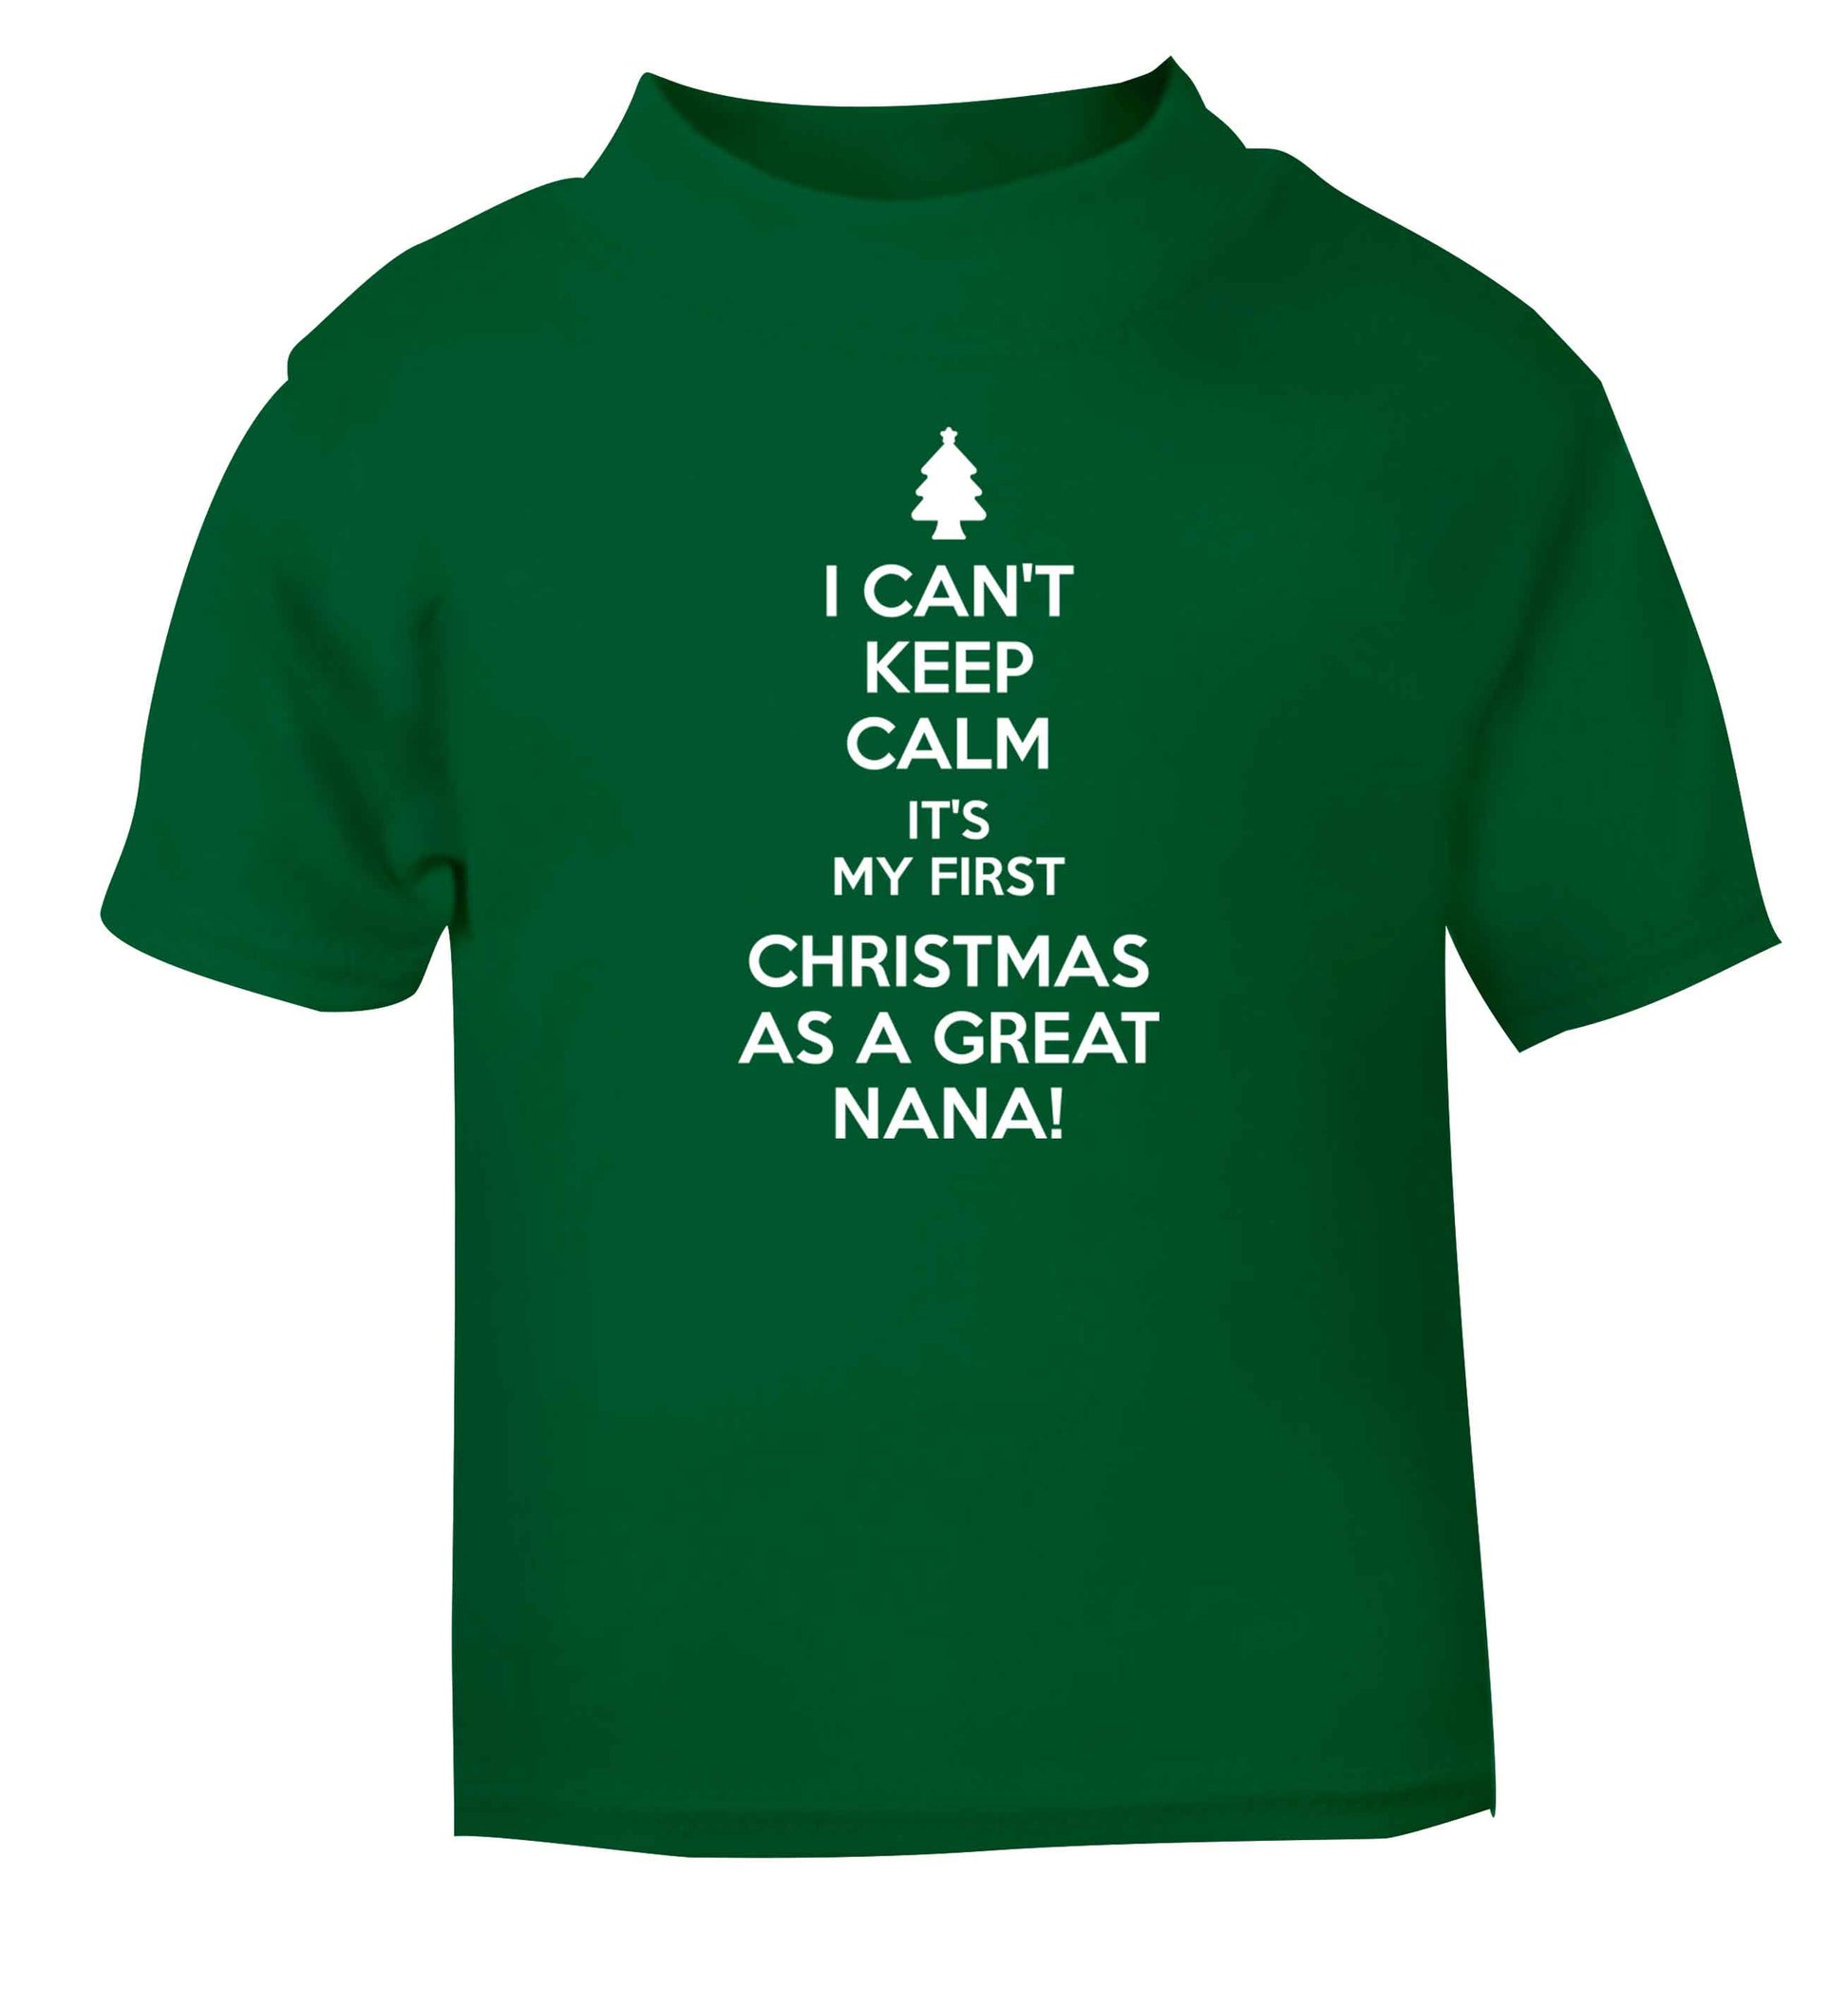 I can't keep calm it's my first Christmas as a great nana! green Baby Toddler Tshirt 2 Years